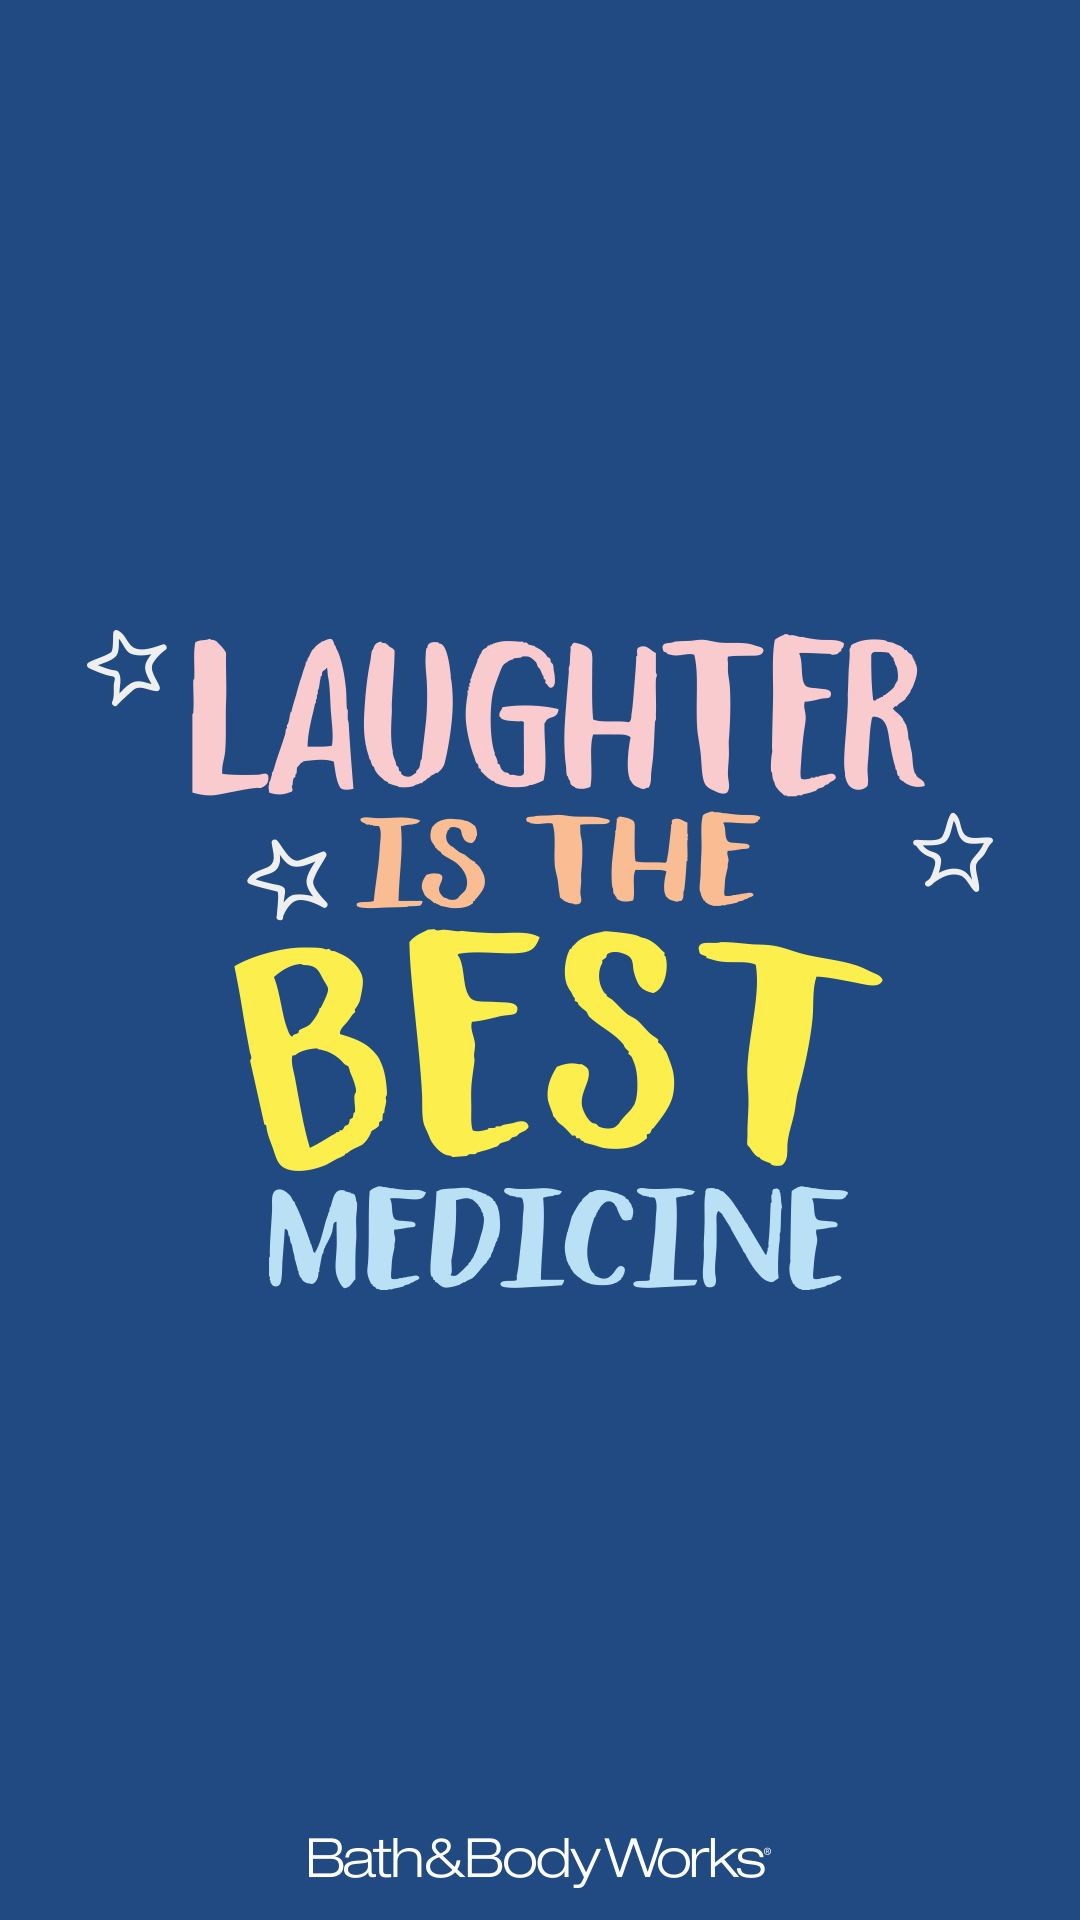 1080x1920 "Laughter is the BEST Medicine" Cell Phone Wallpaper Background